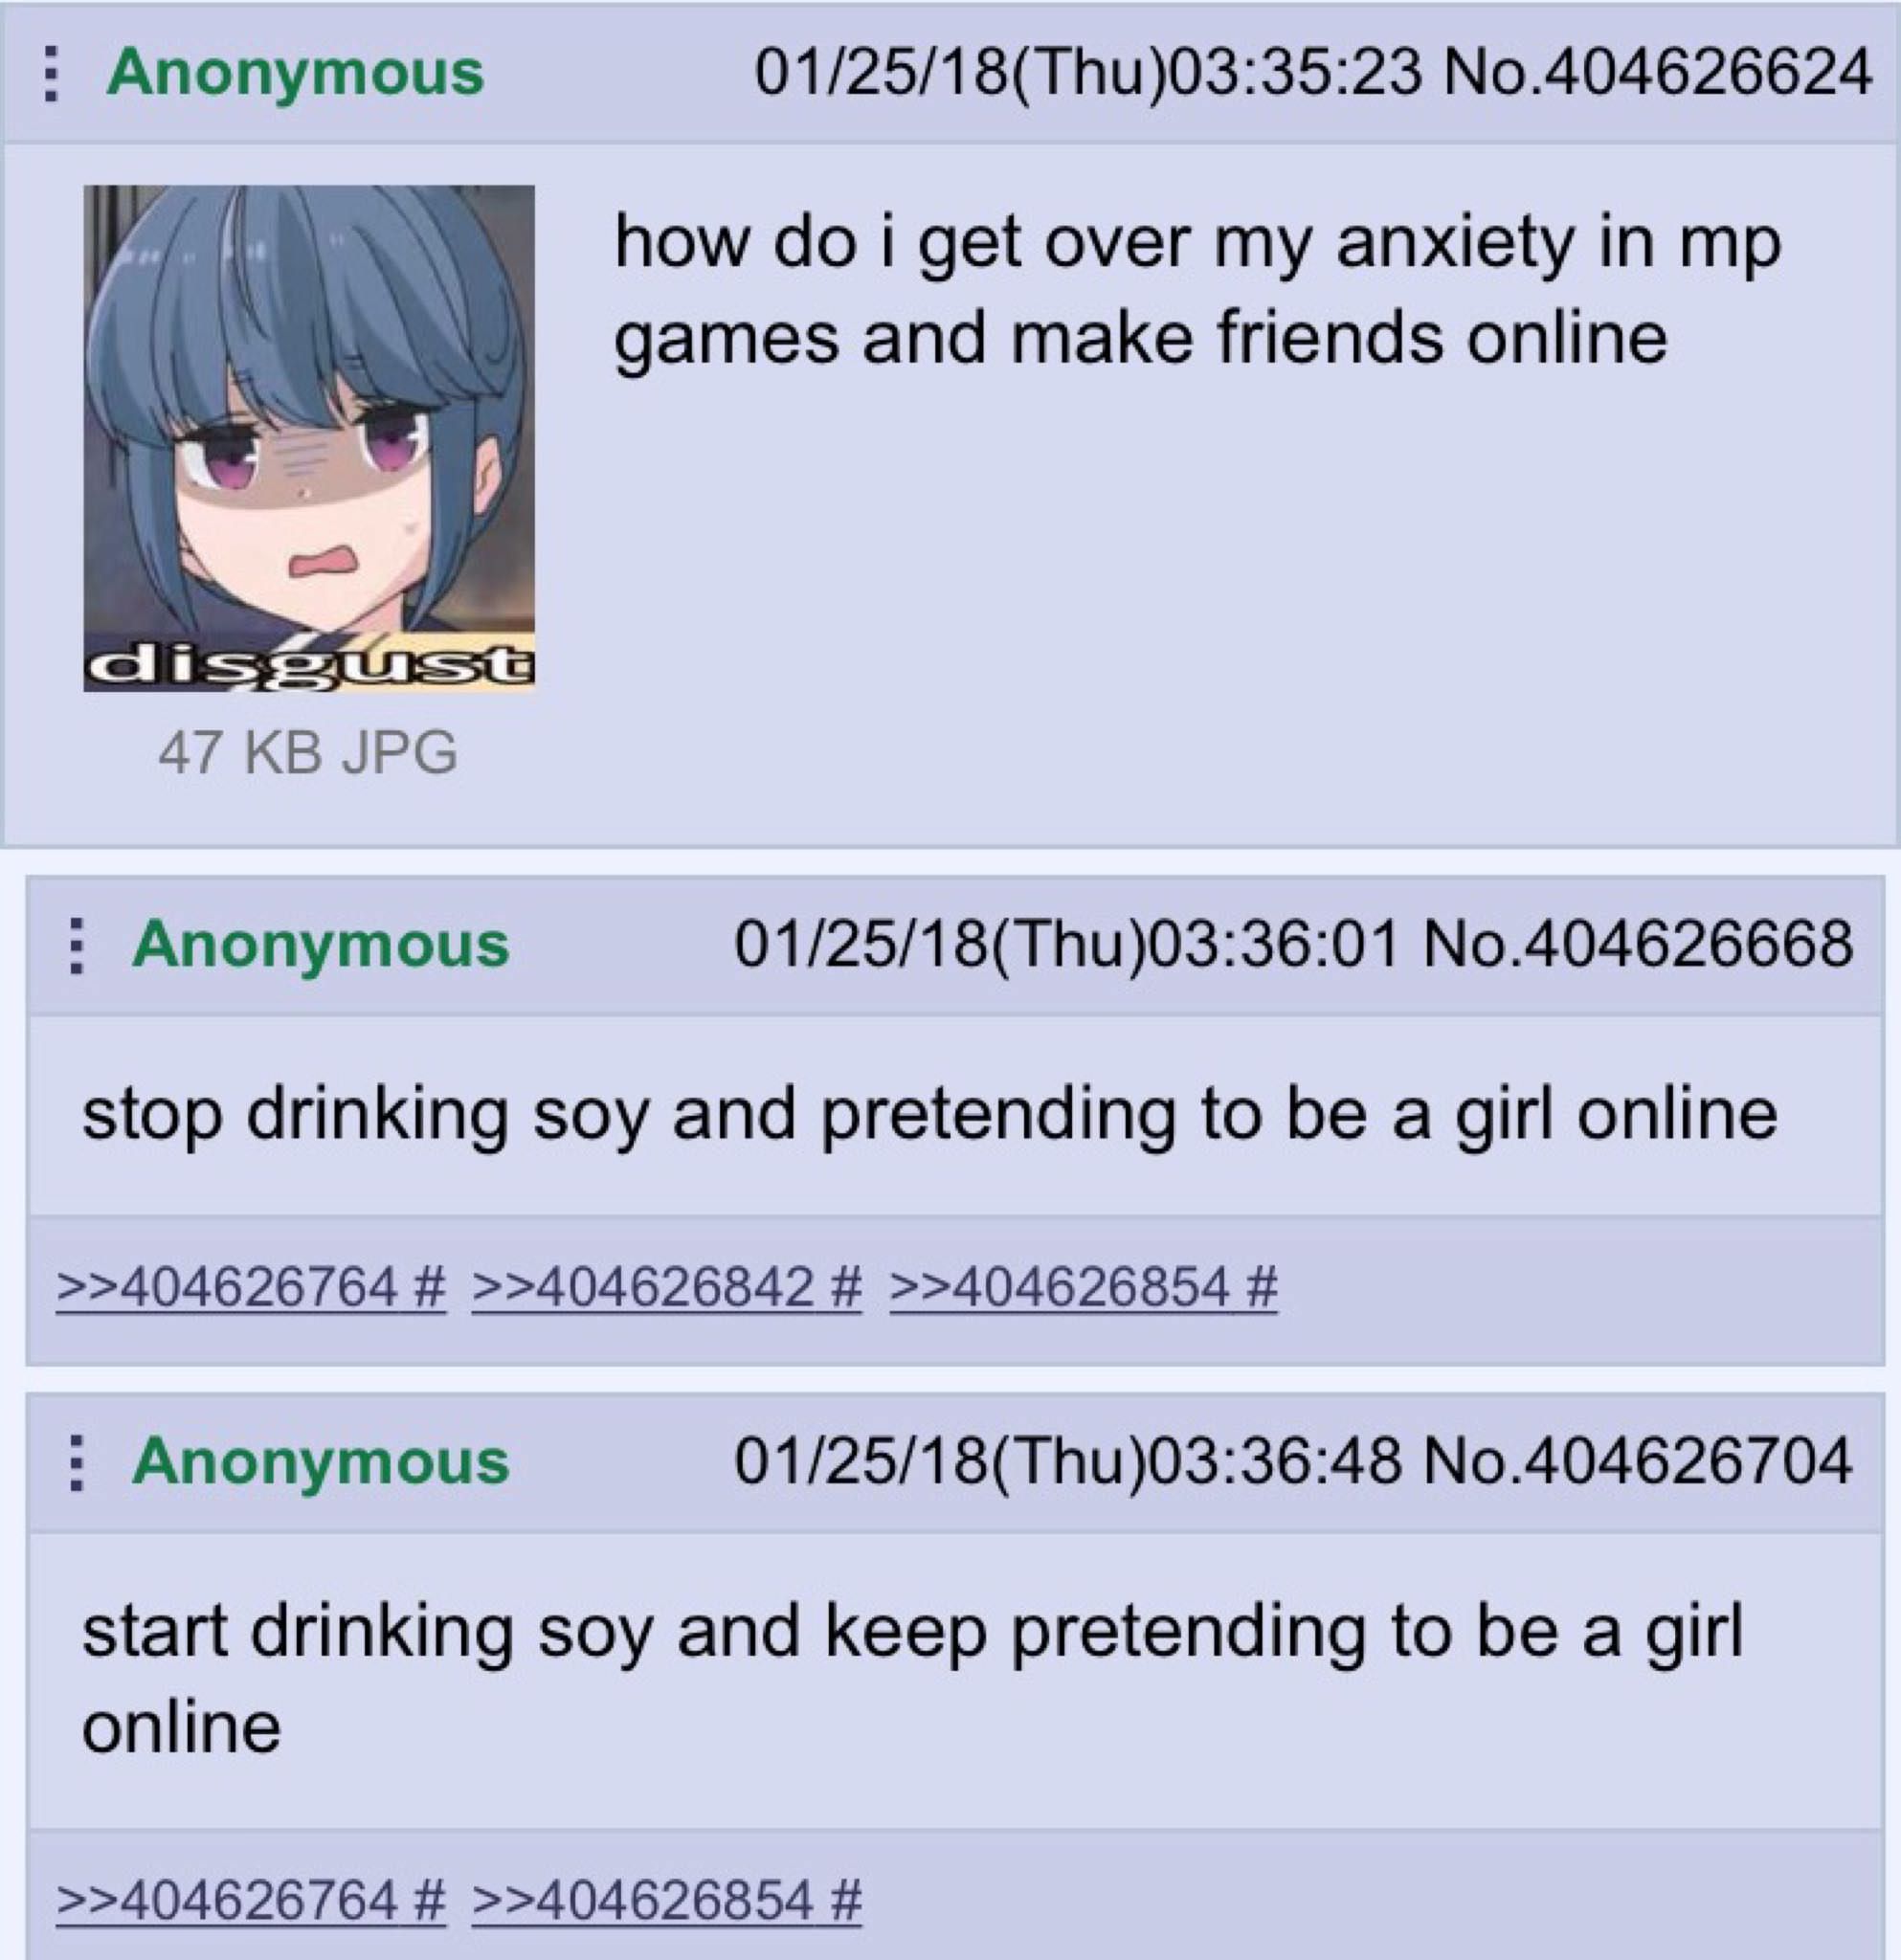 Anon wants to make friends